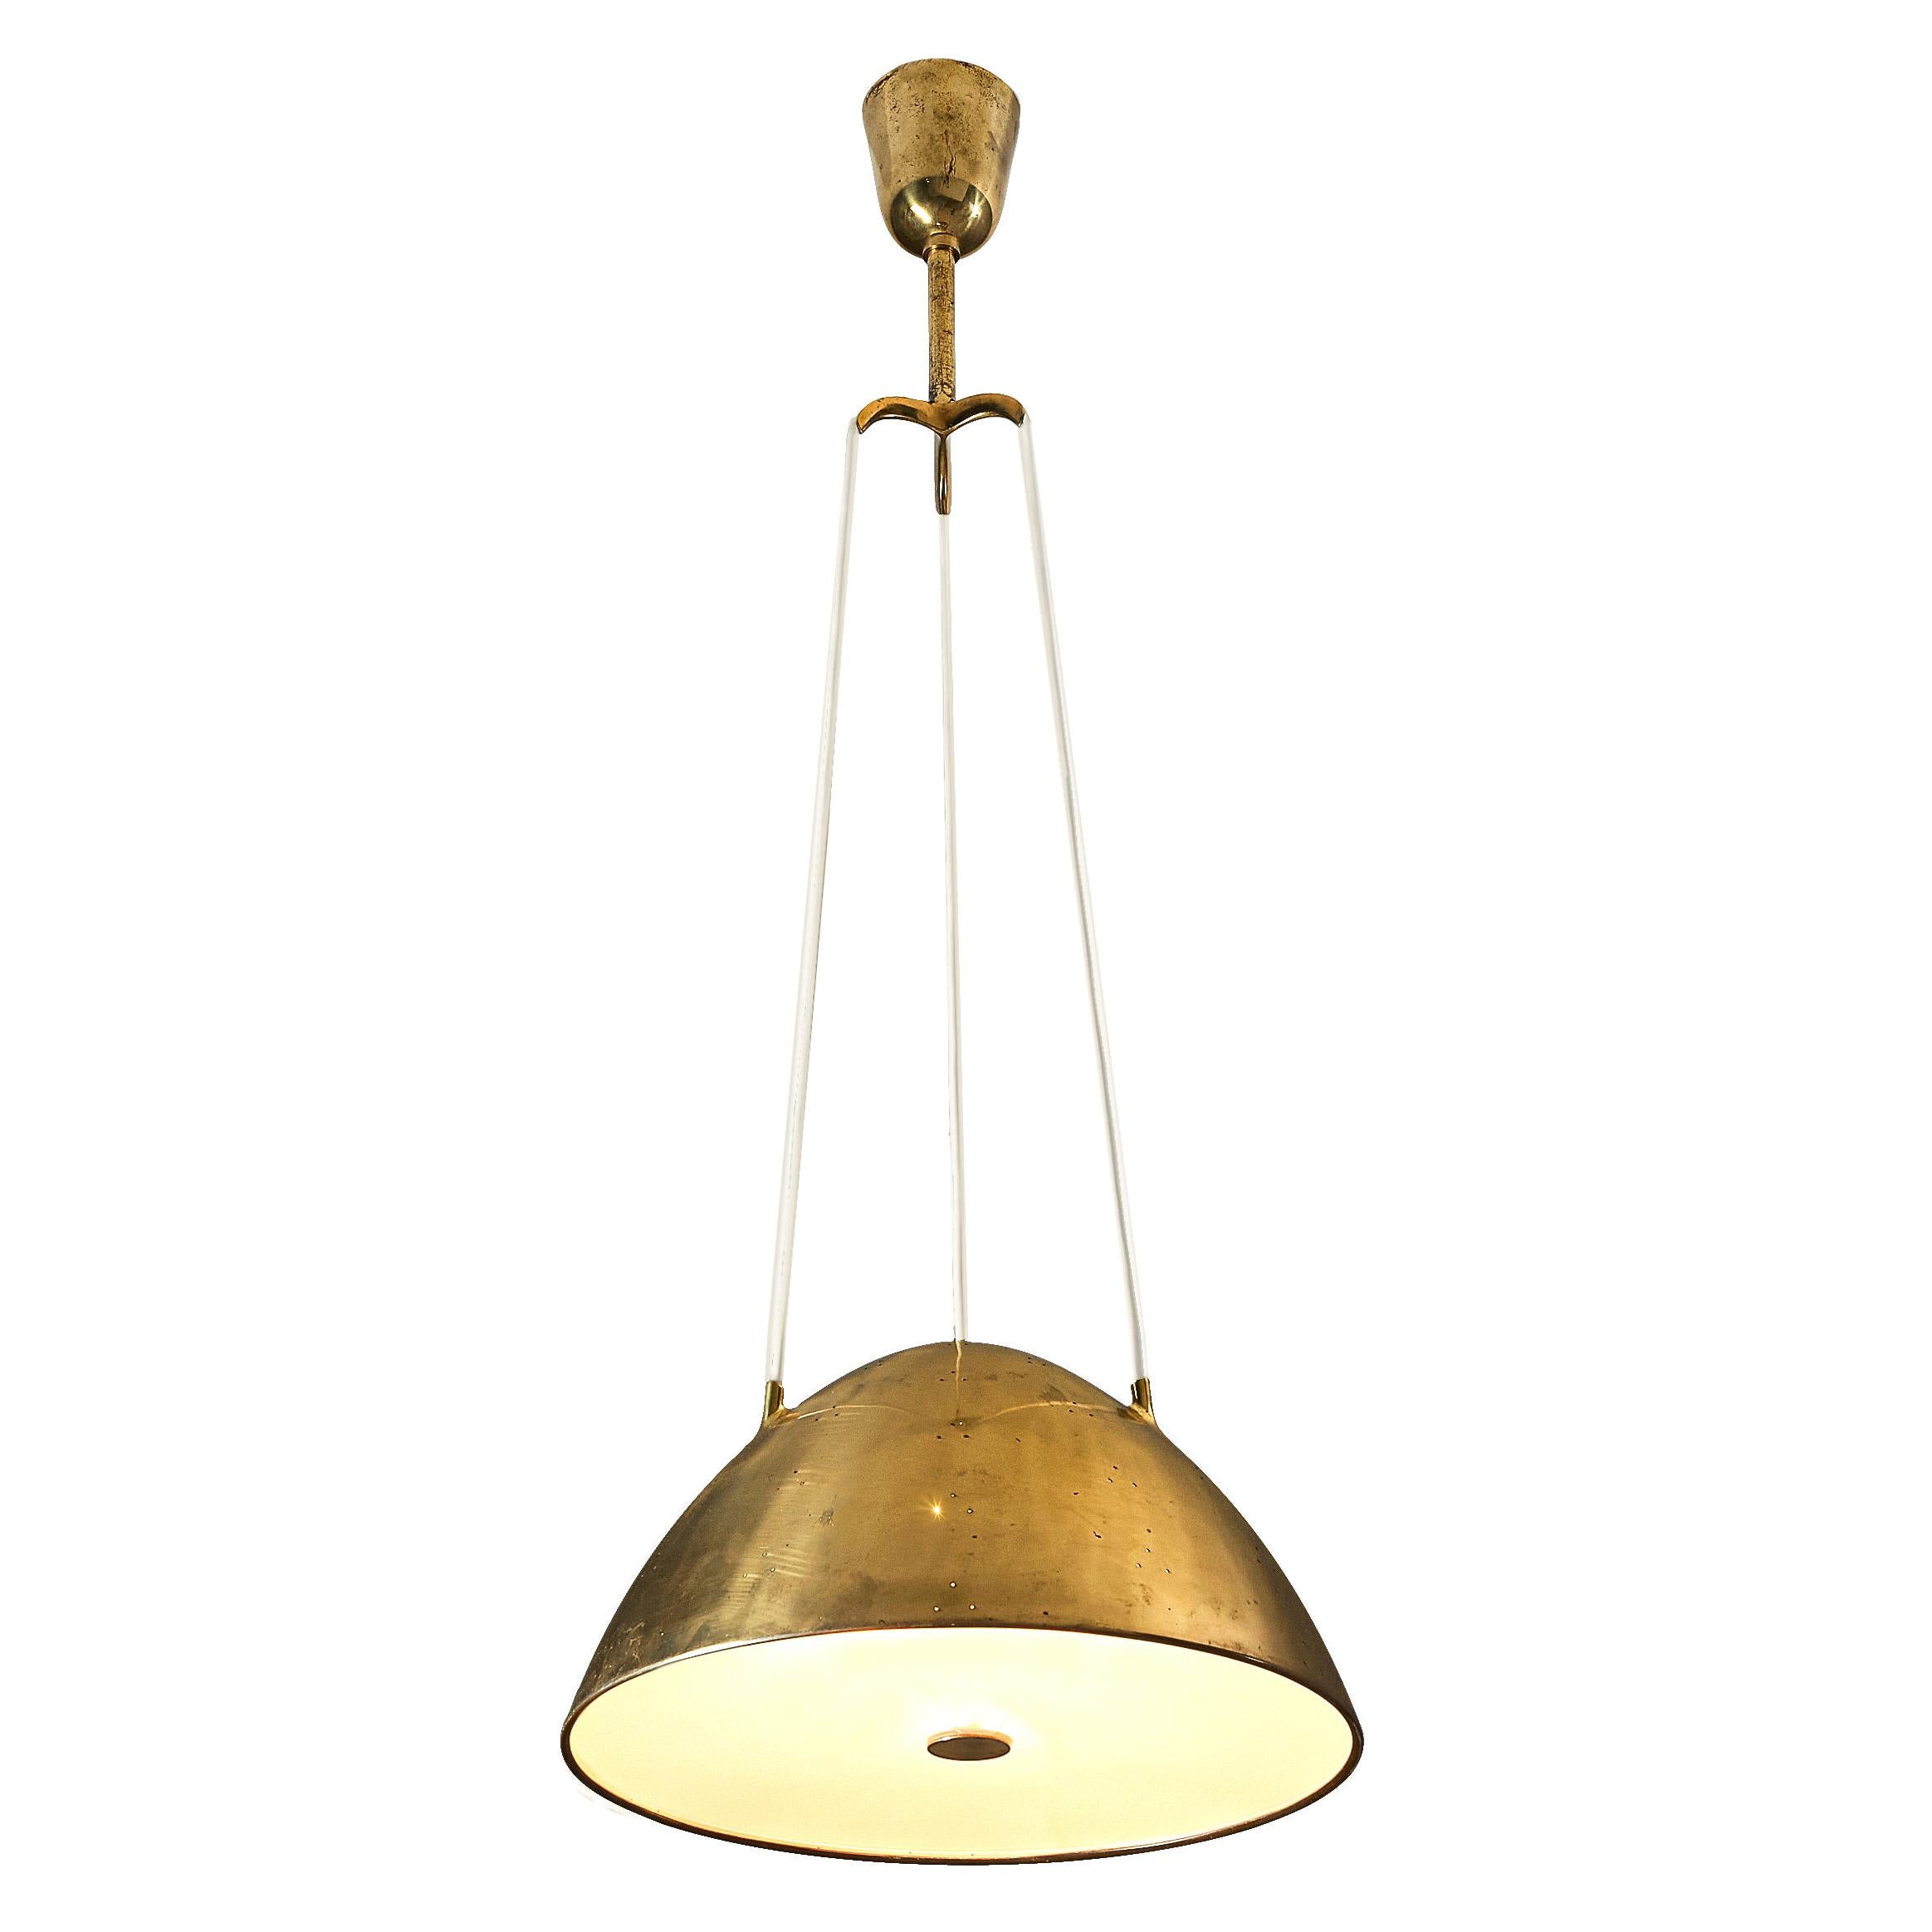 Paavo Tynell for Taito Oy Pendant Lamp Model '1959' in Brass and Glass